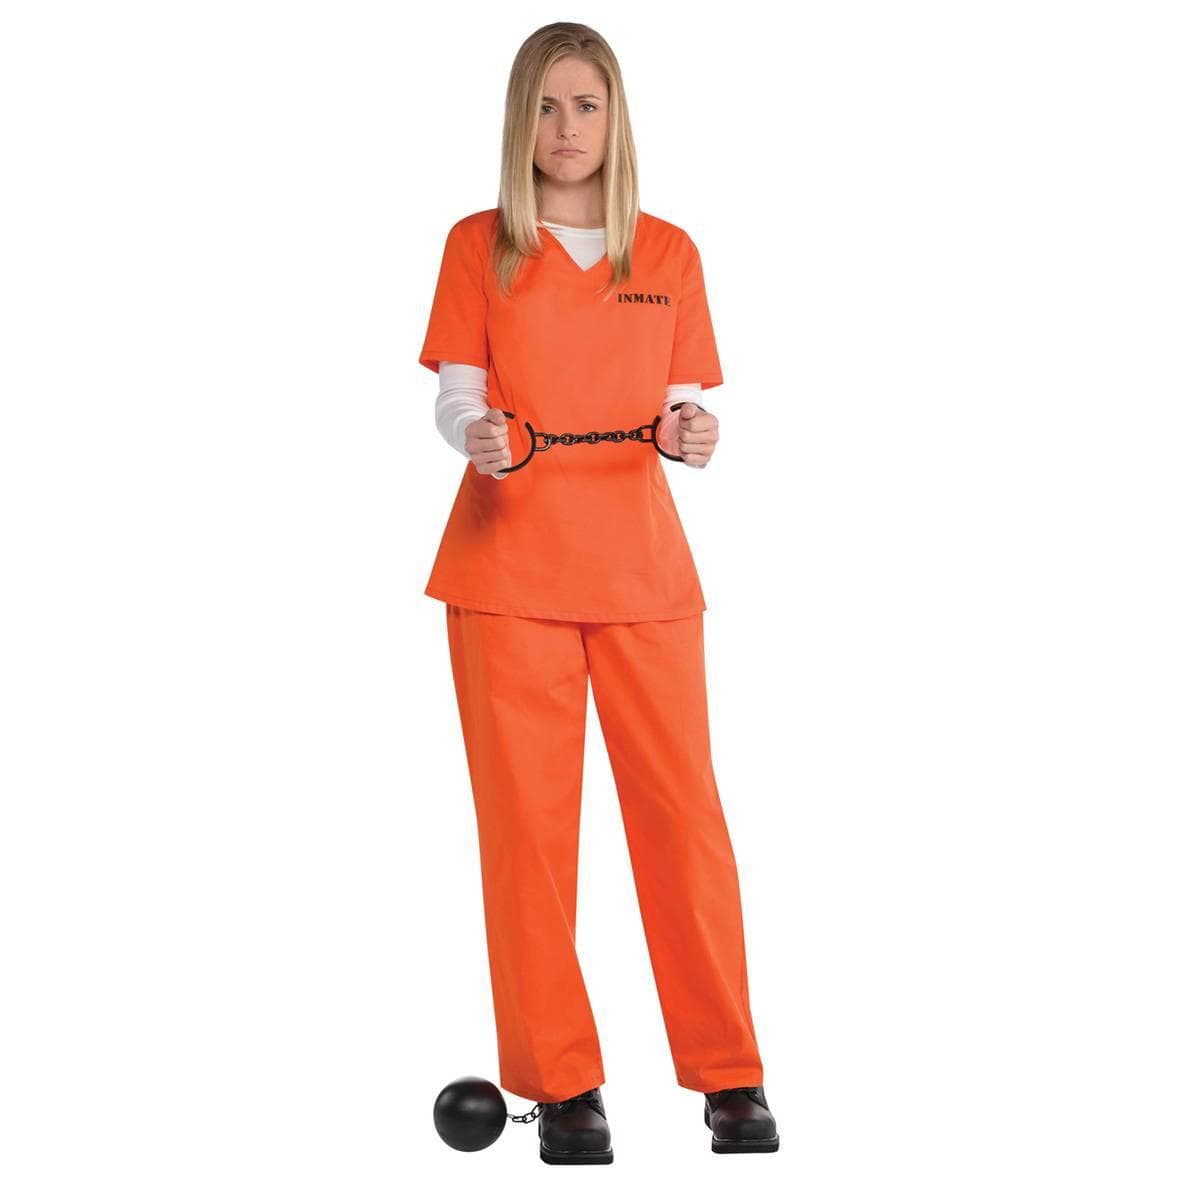 SUIT YOURSELF COSTUME CO. Costumes Orange Inmate Costume for Adults 809801758789